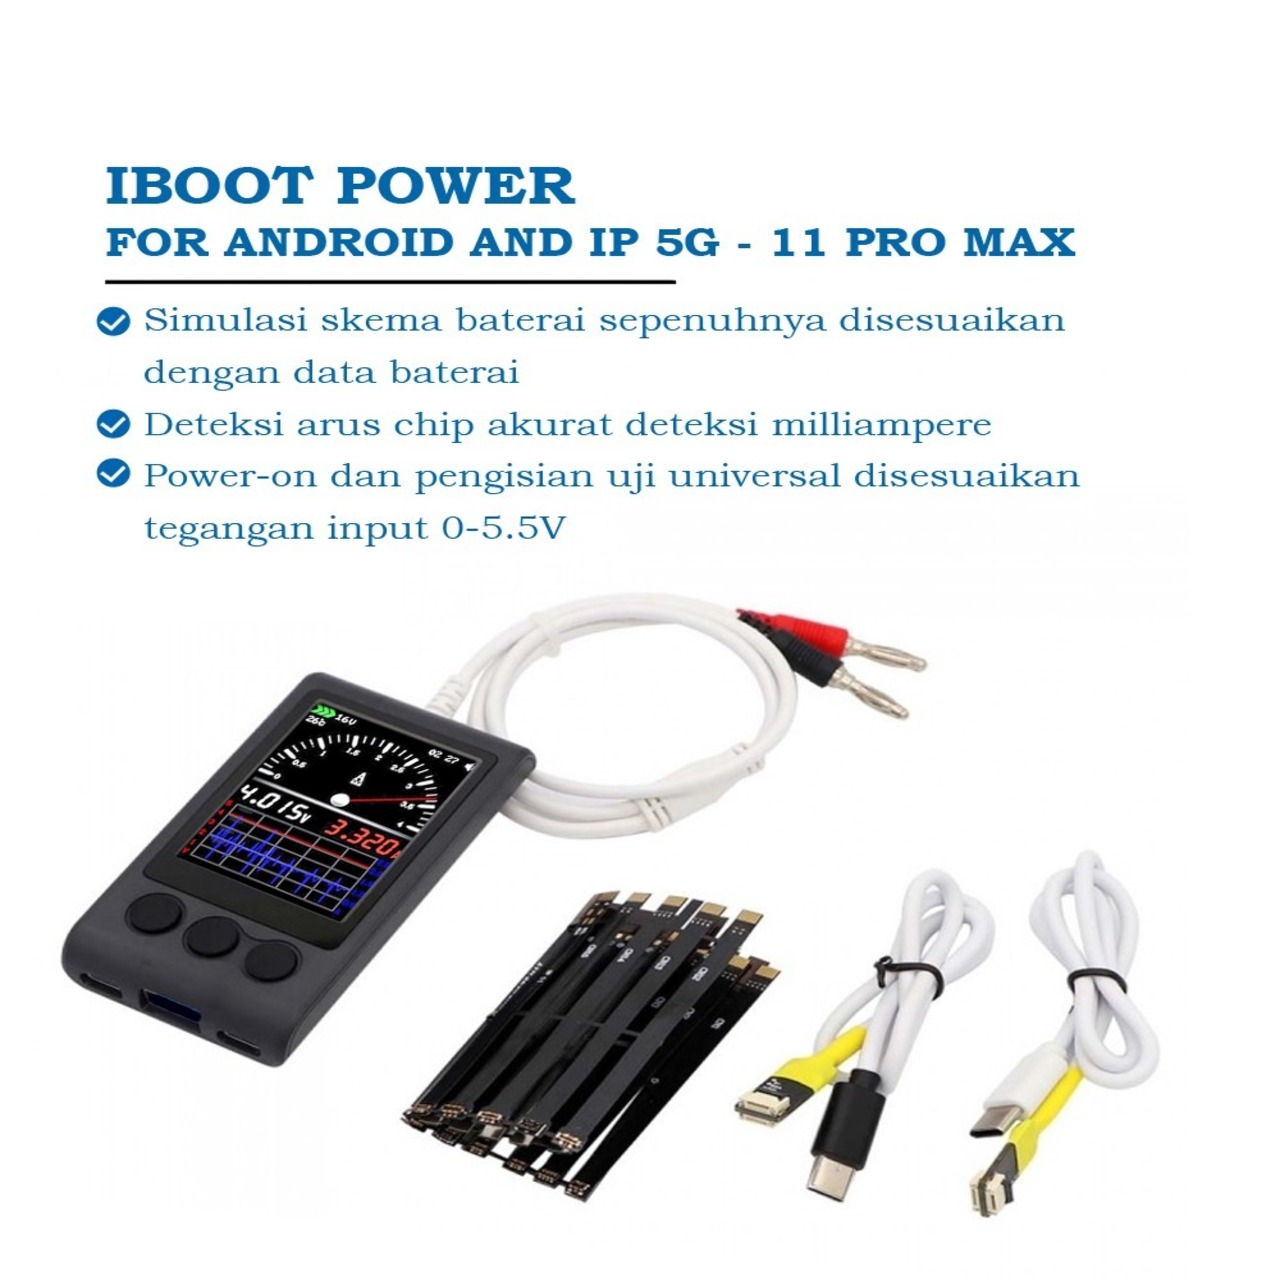 IBOOT POWER FOR ANDROID AND IP 5G - 11 PRO MAX